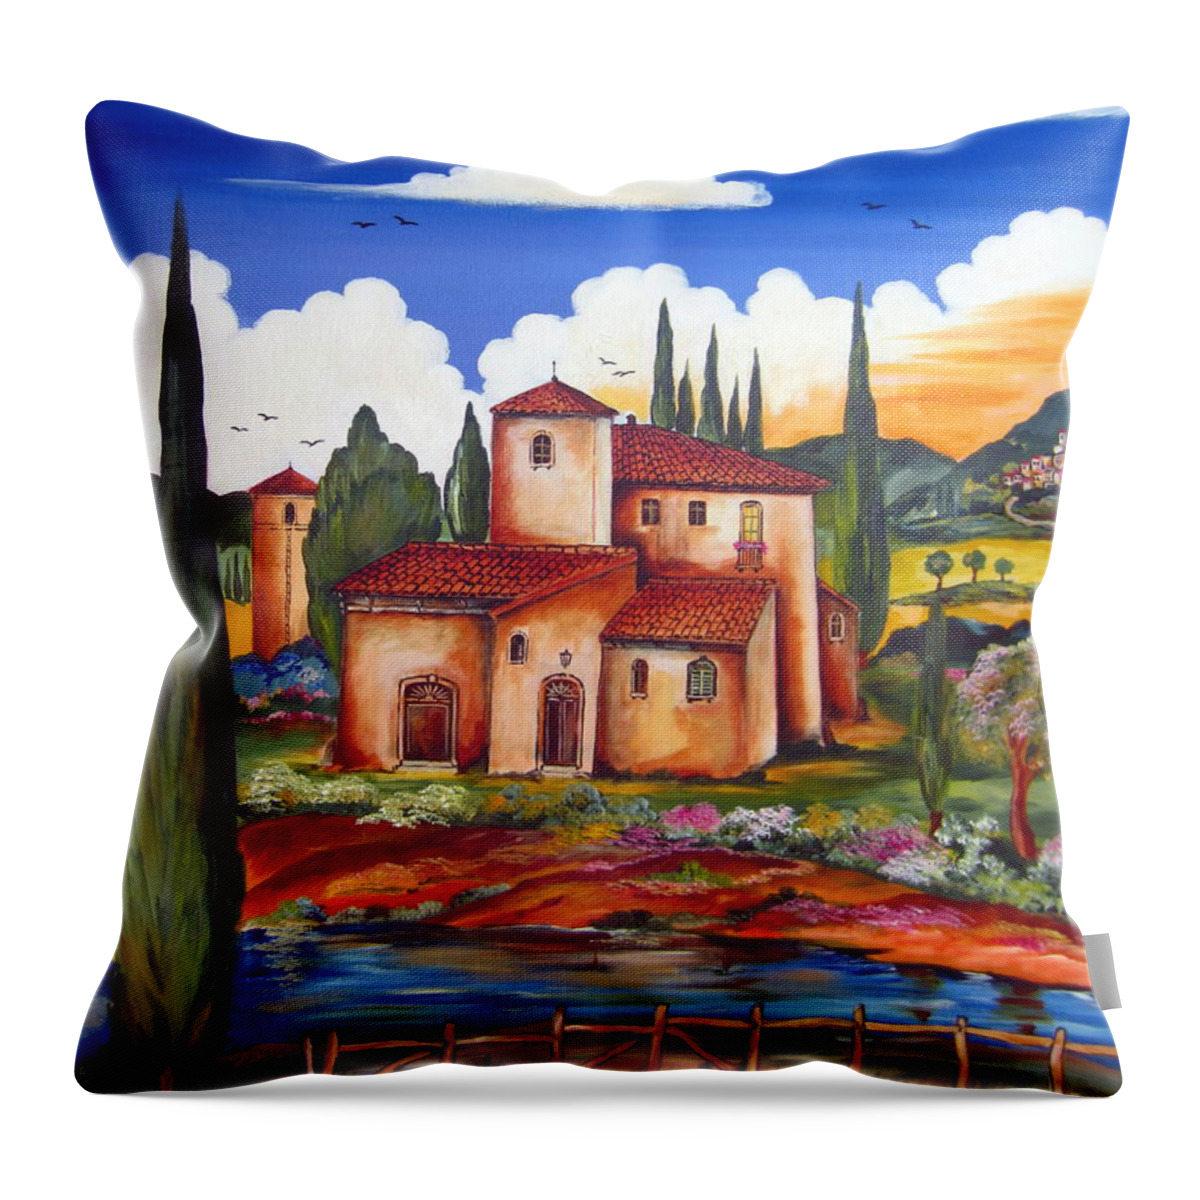 Tuscany Throw Pillow featuring the painting Tuscany Farmhouse by Roberto Gagliardi